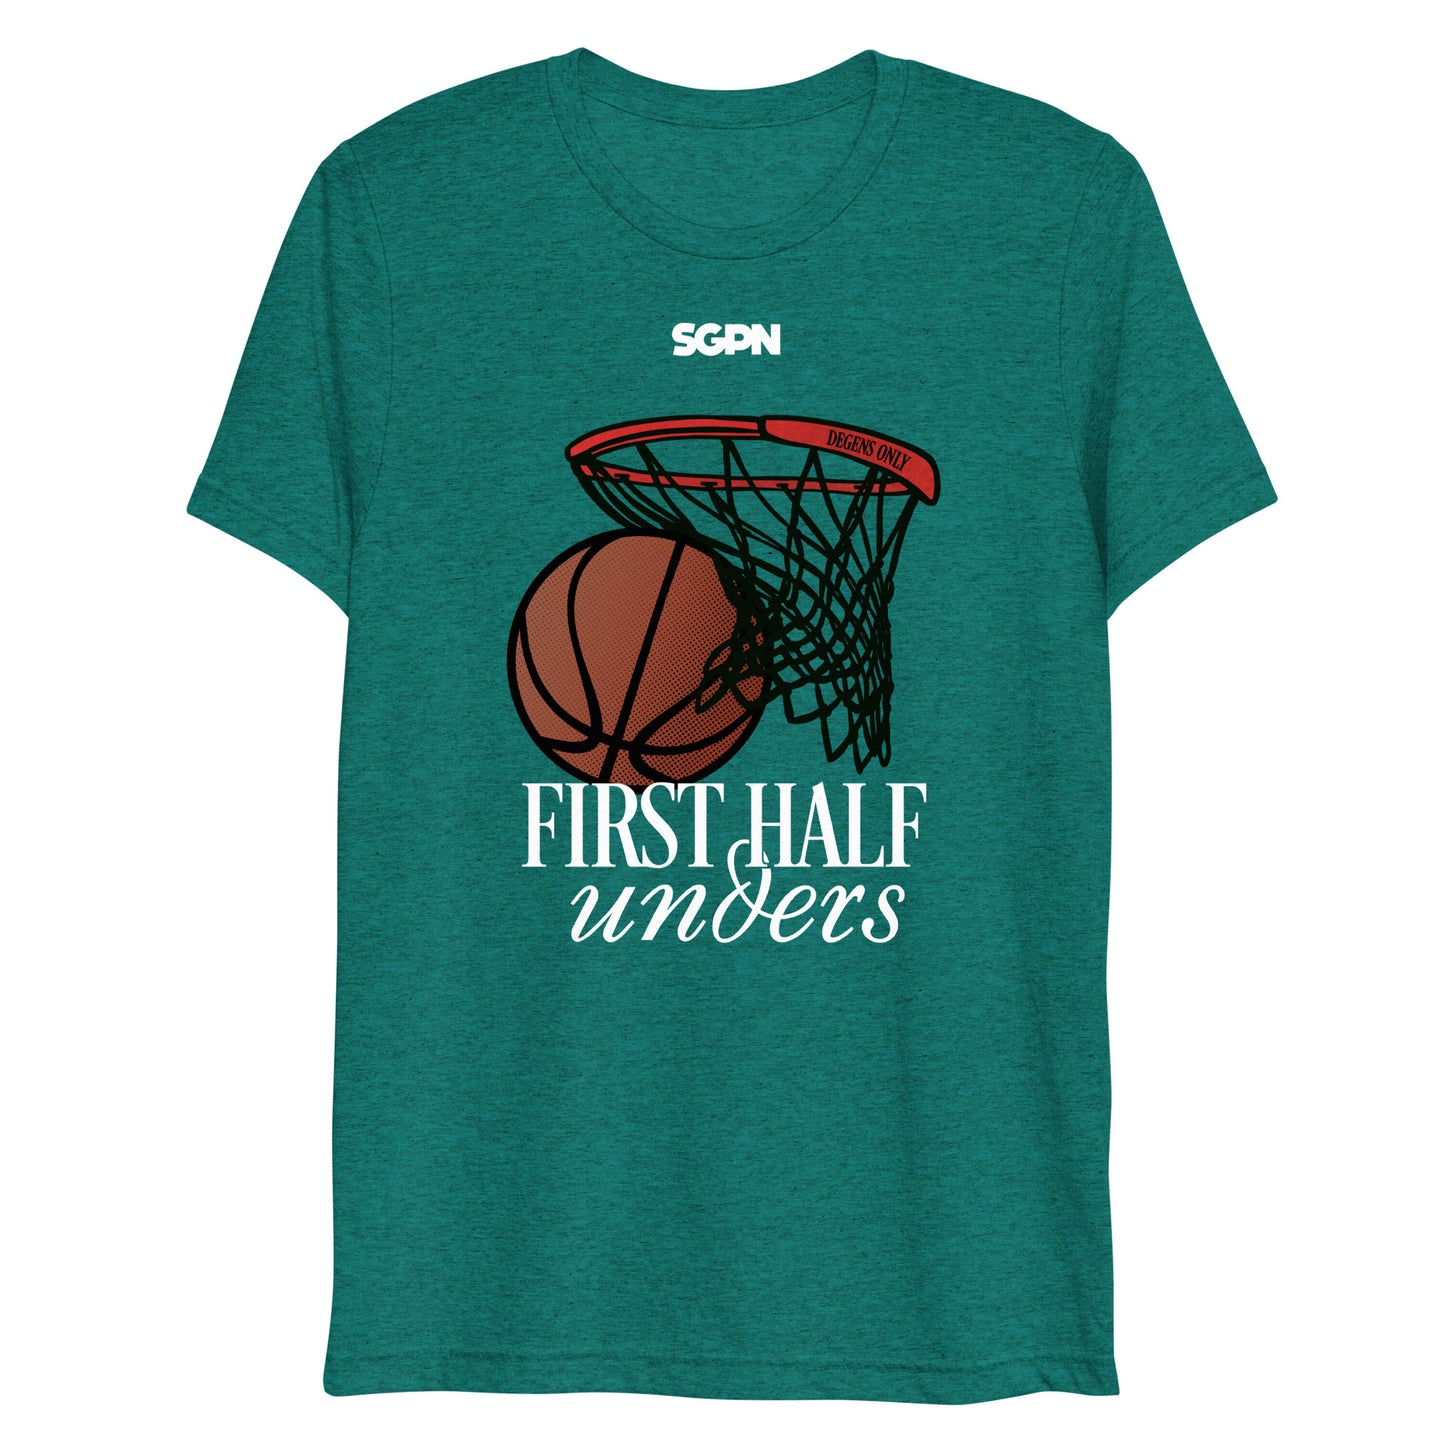 First Half Unders - Campus Tour edition - Short sleeve t-shirt